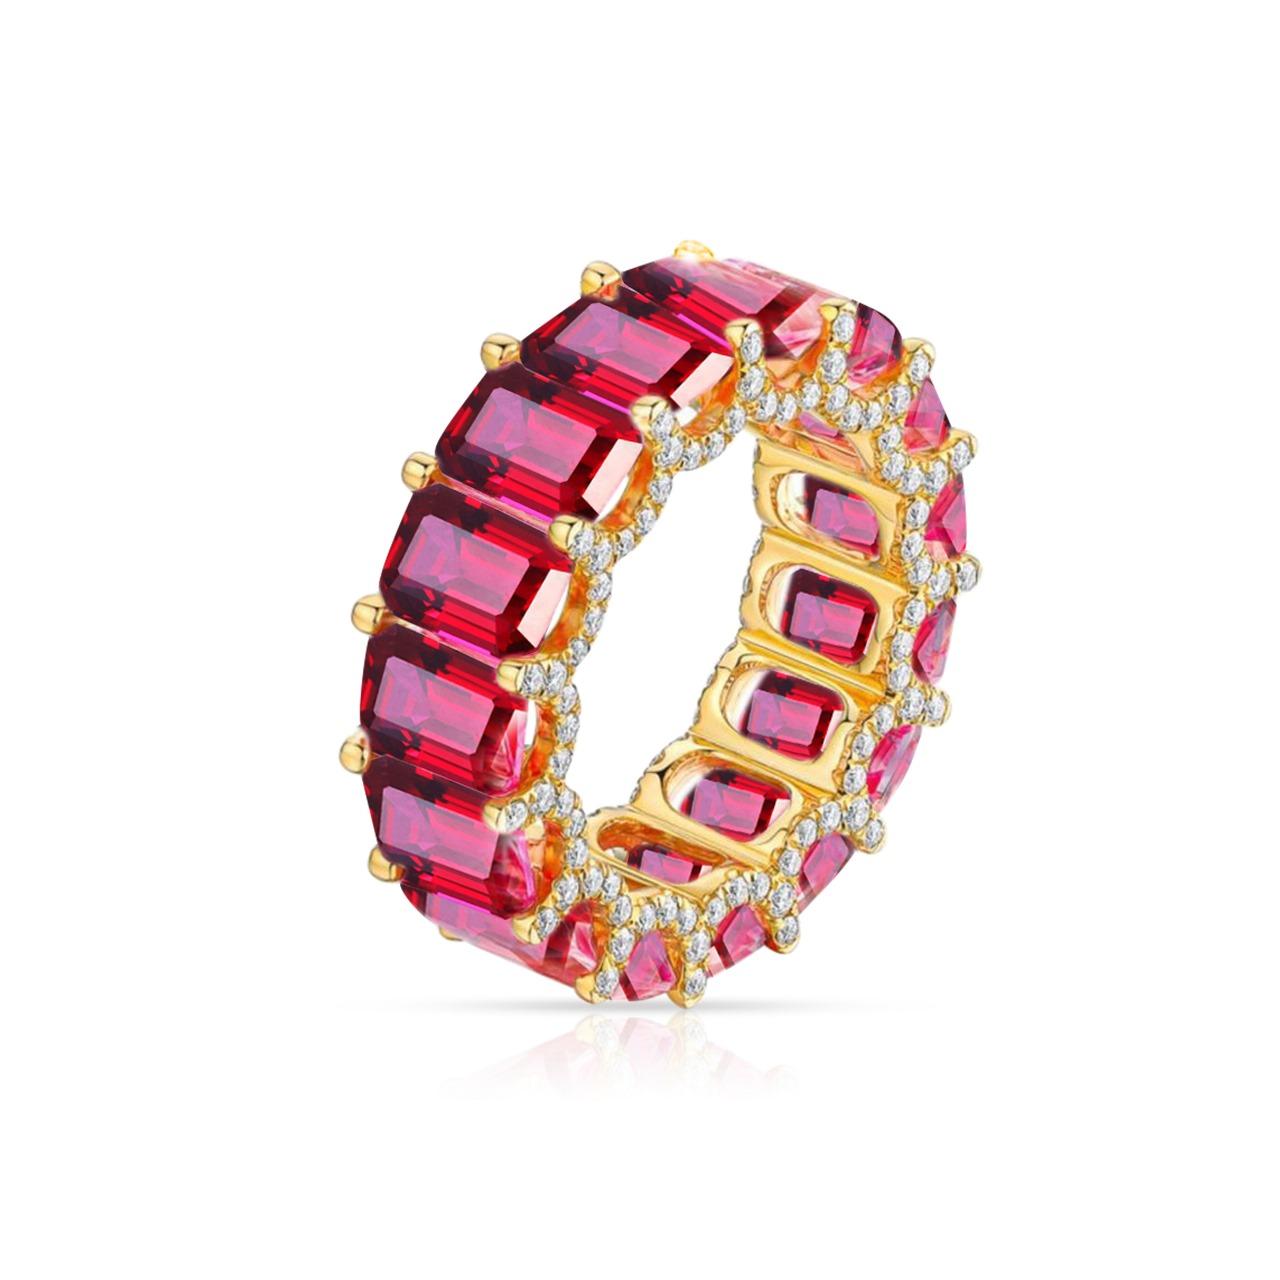 Experience the world-renowned craftsmanship of the Baguette Eternity Band collection, celebrated for its exquisite use of baguette-cut gemstones. Designed by minimalist artist Vera from AdornA Lux High Jewelers, these bands are masterfully